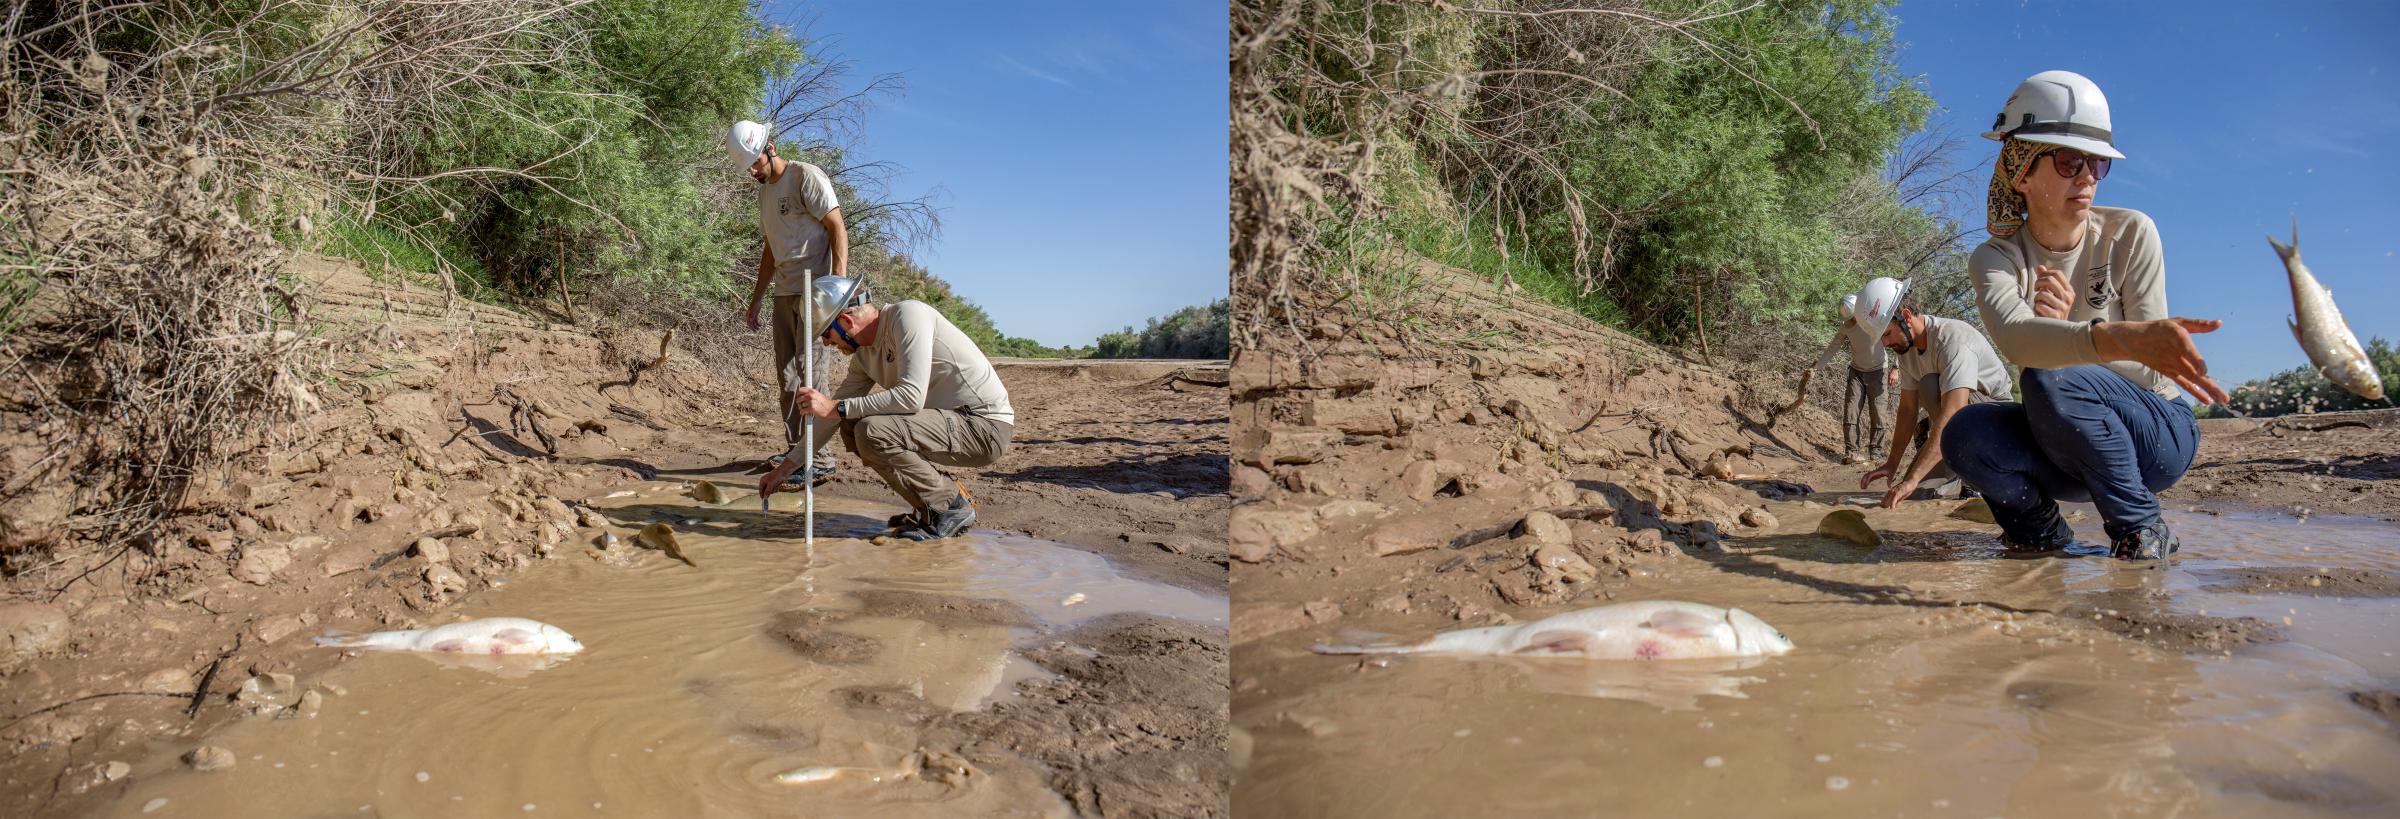 Crisis on the Rio Grande - The U.S. Fish and Wildlife team measures the temperatures of each pond, noting what kind of...